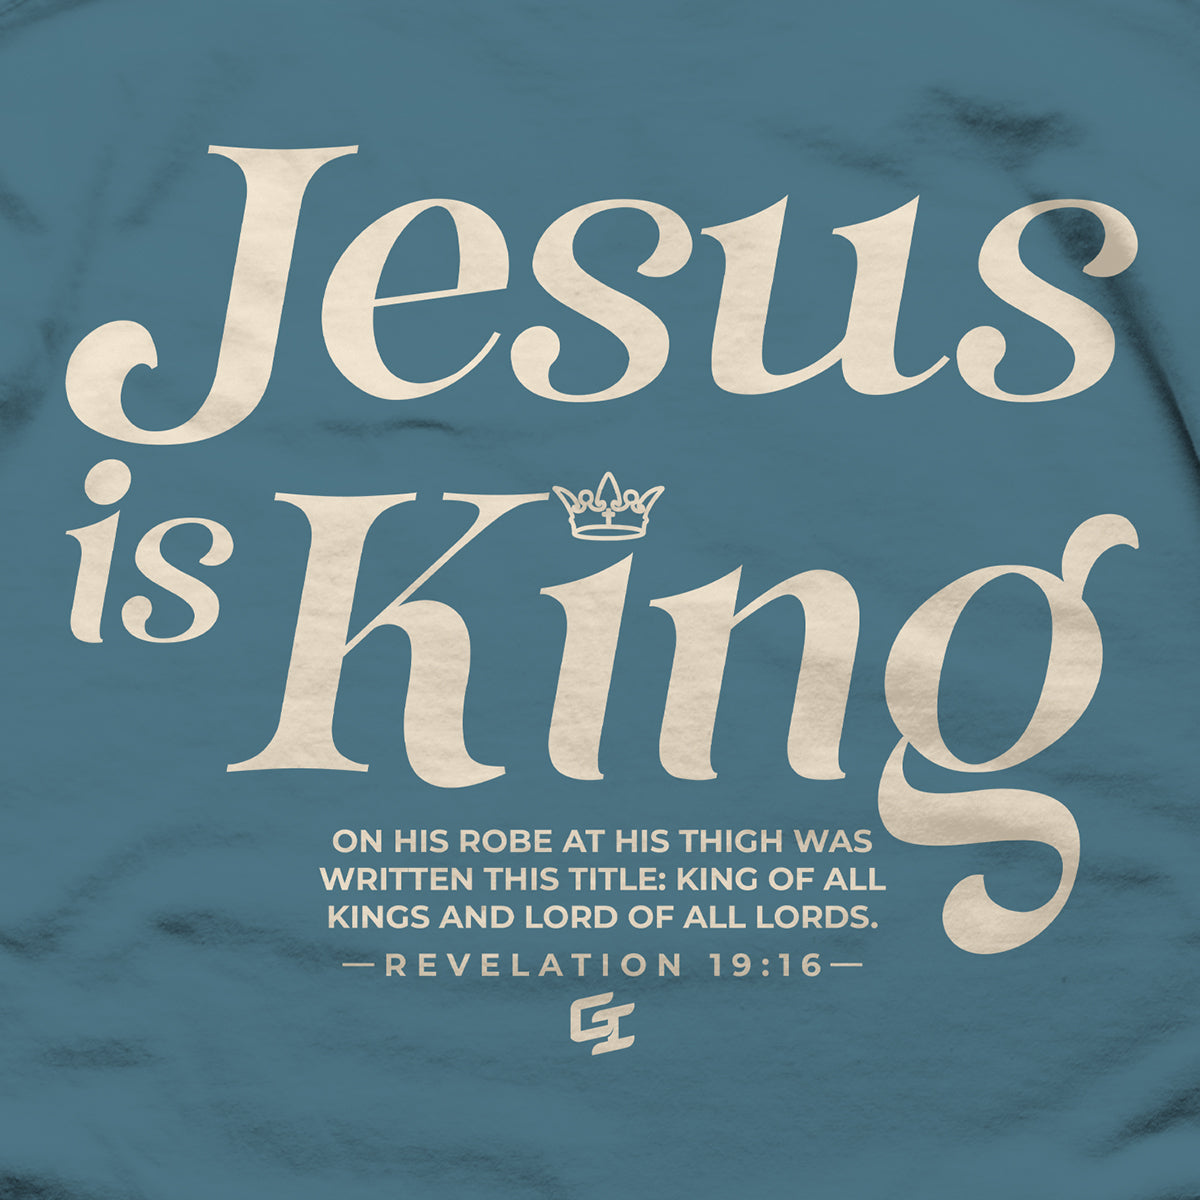 [Limited Edition] Epiphany 'Jesus Is King' Lightweight T-Shirt